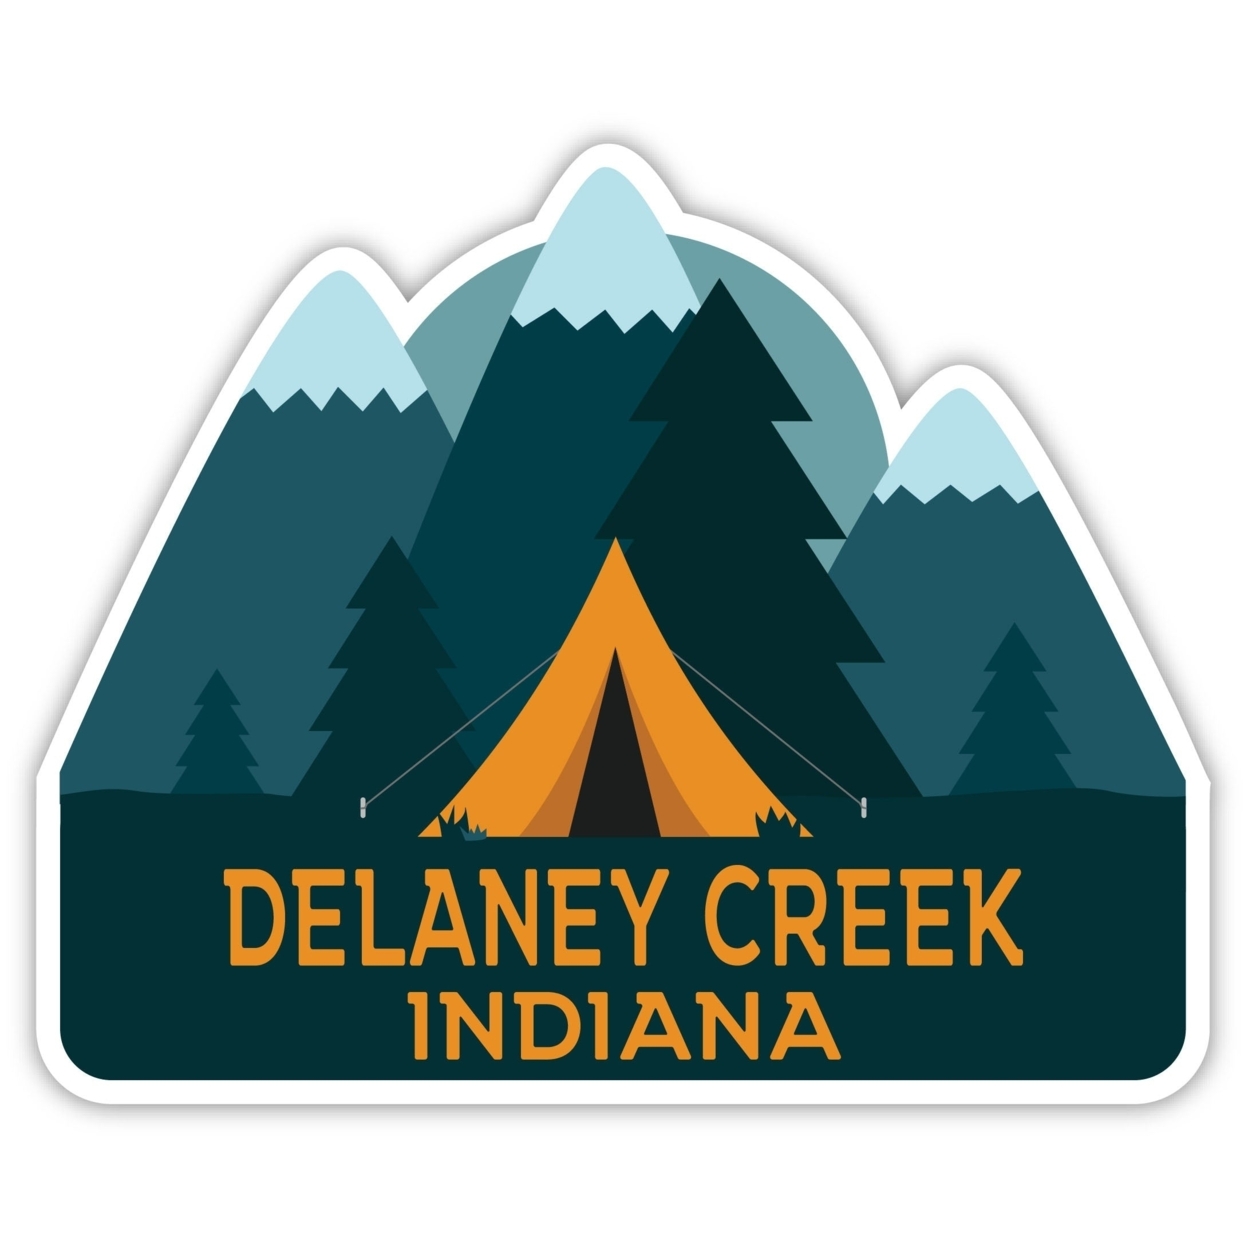 Delaney Creek Indiana Souvenir Decorative Stickers (Choose Theme And Size) - 4-Pack, 6-Inch, Tent